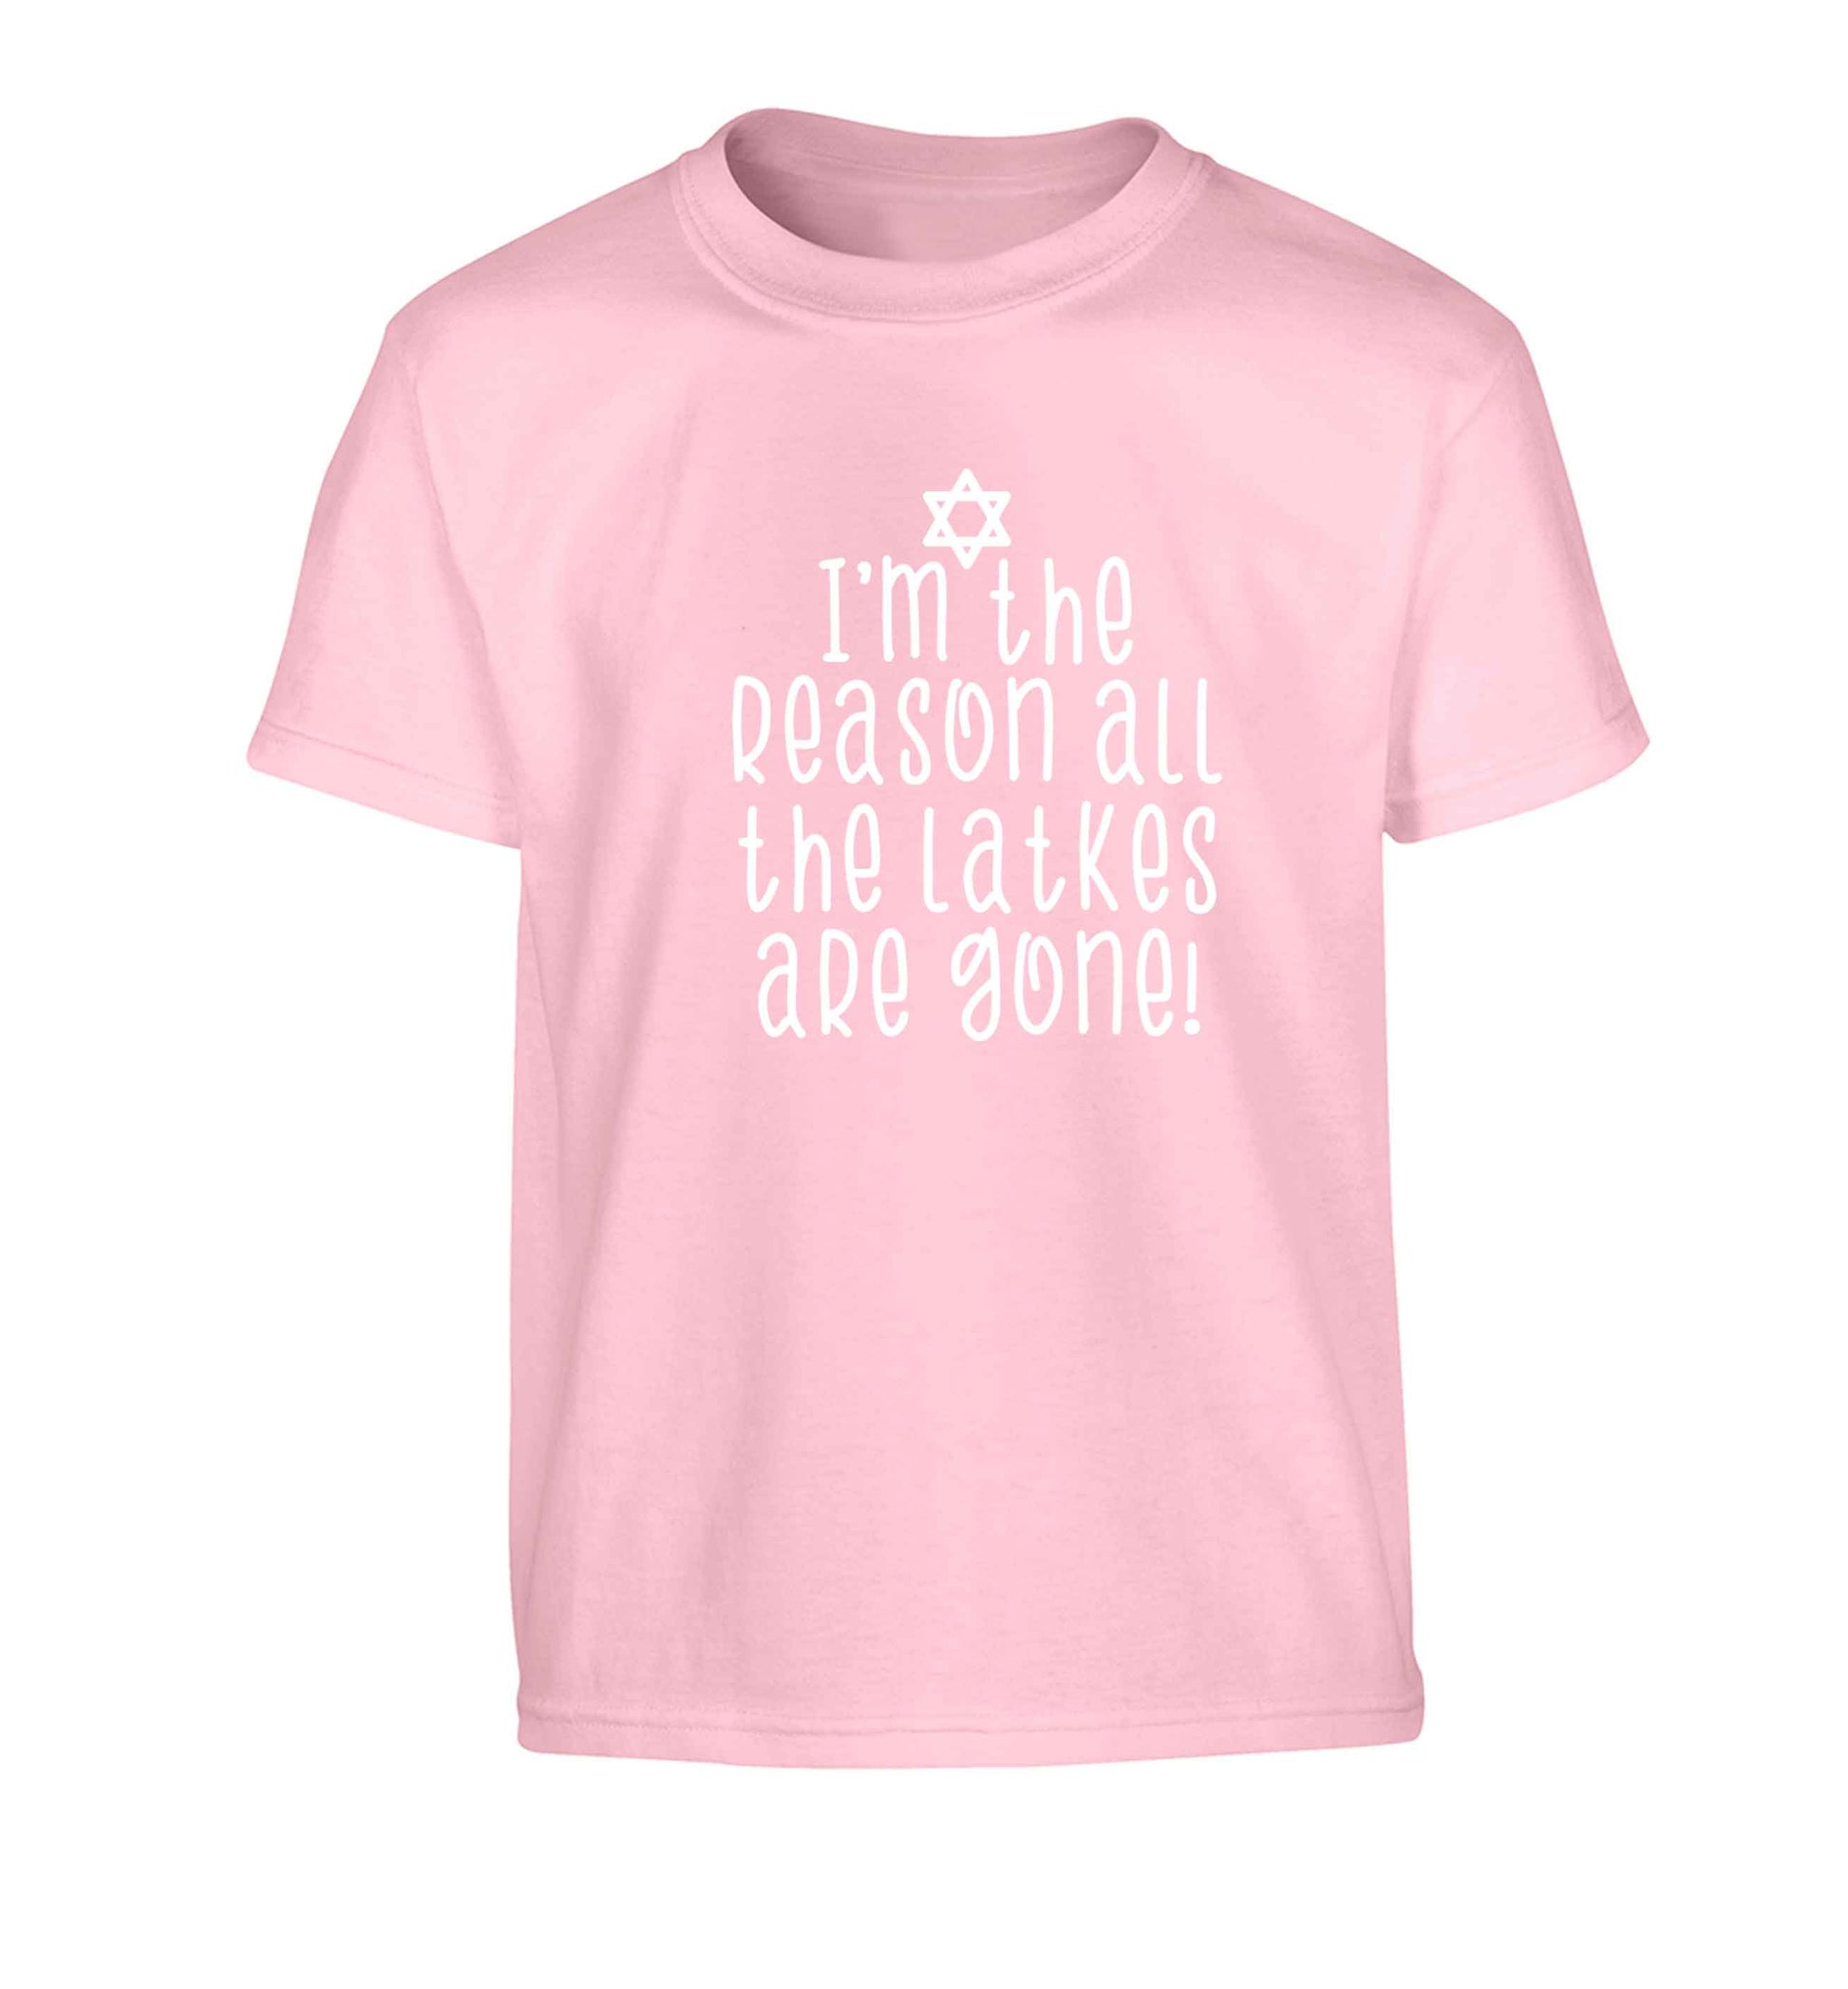 I'm the reason all the latkes are gone Children's light pink Tshirt 12-13 Years